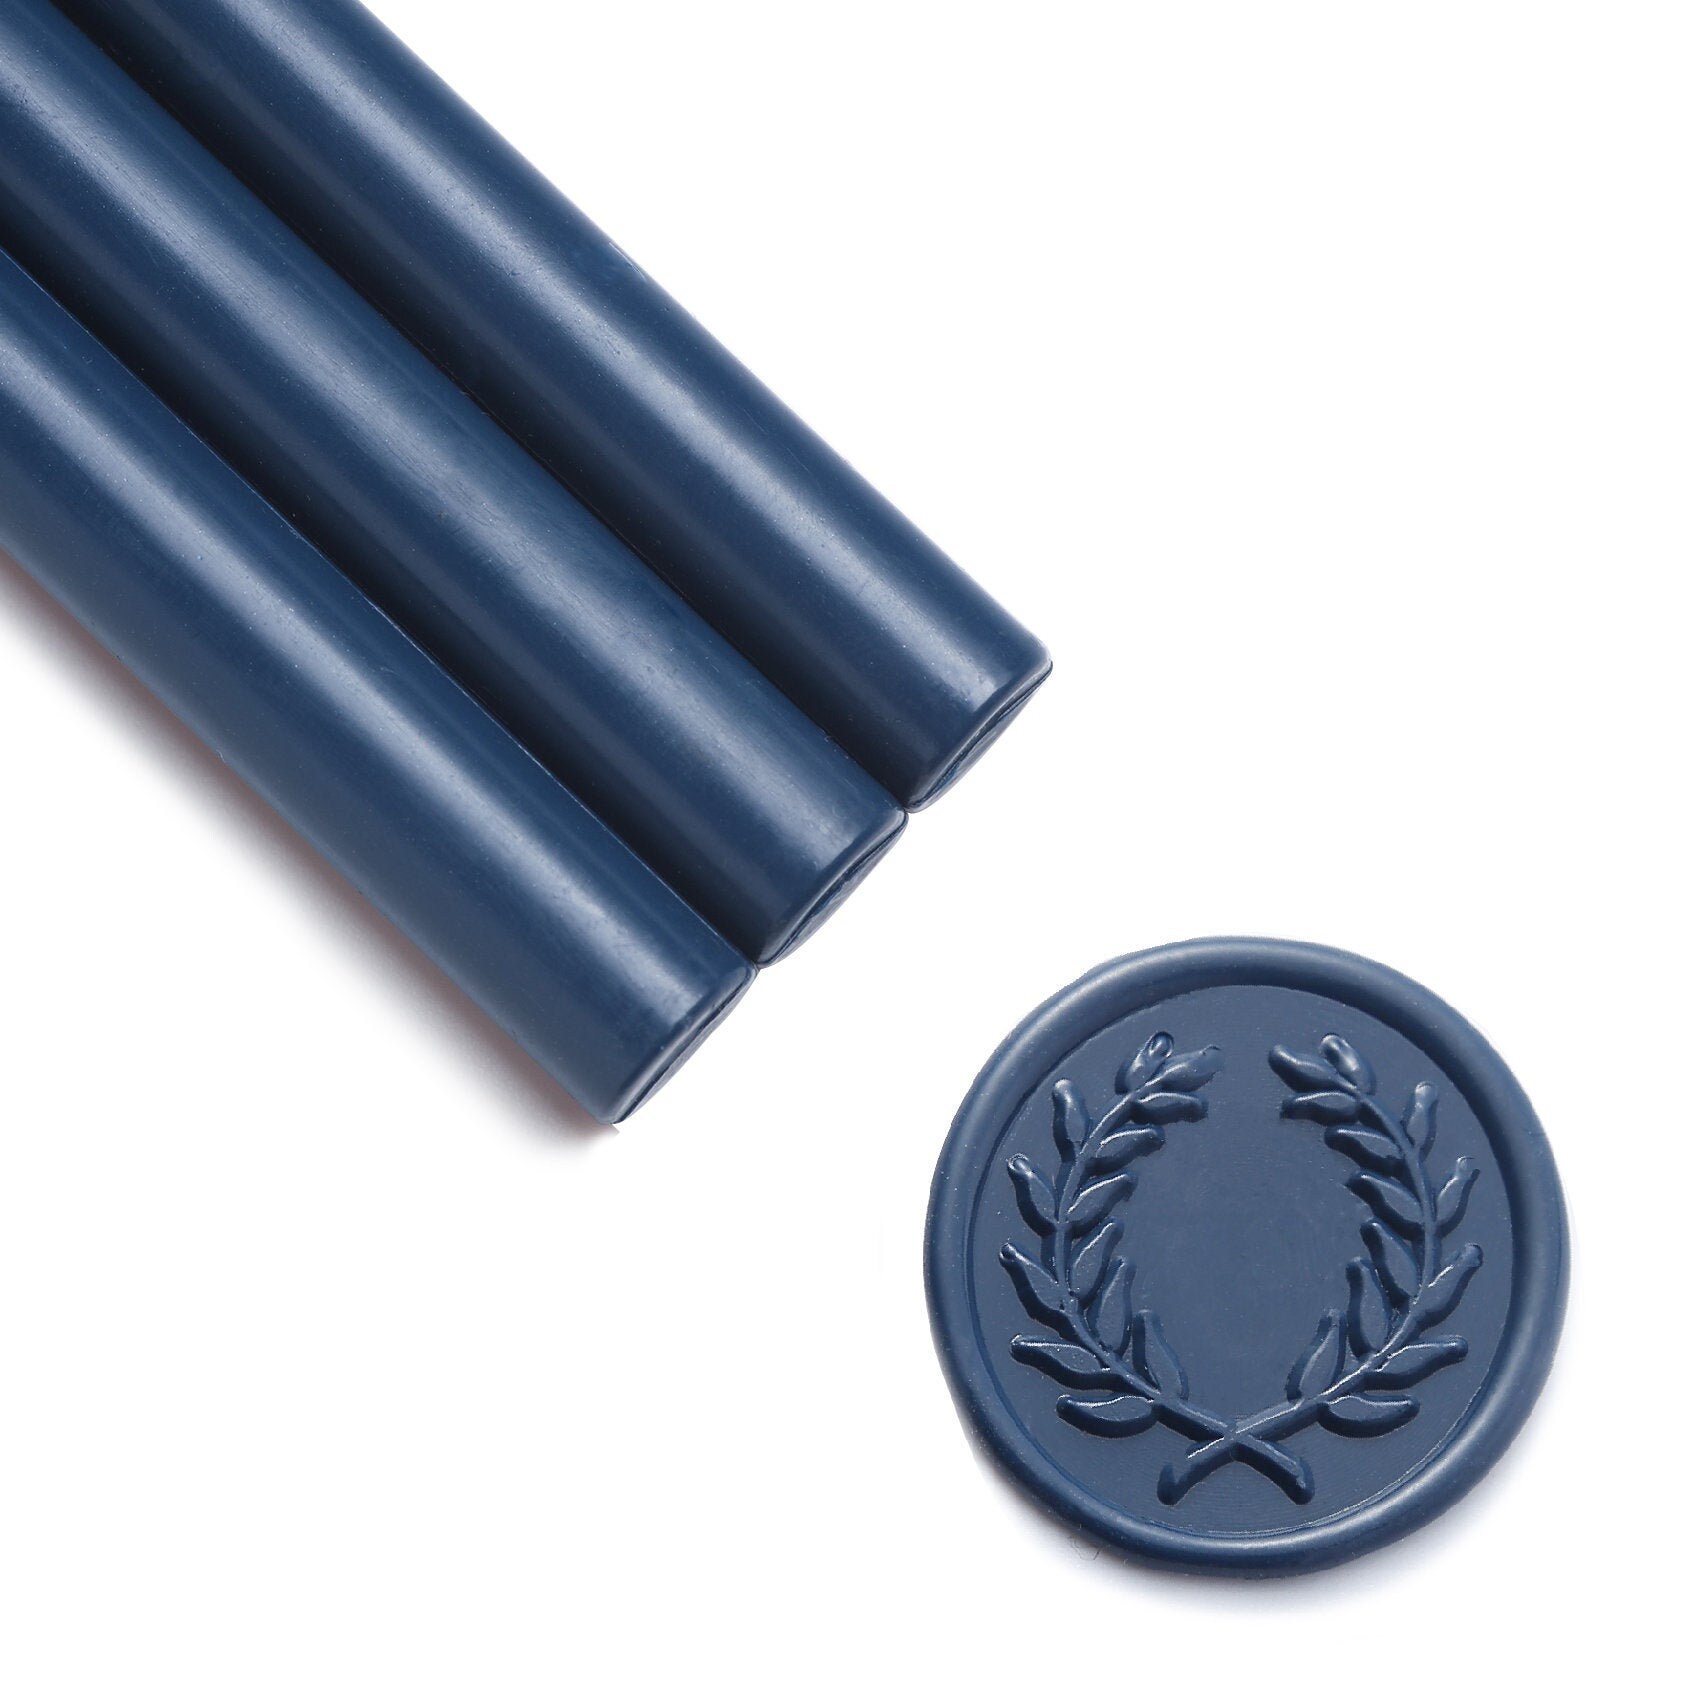  Blue Wax Sticks STAMPMASTER 20pcs Mini Wax Seal Sticks Blue  Sealing Wax Sticks for Wedding Invitations Letter Envelope Cards Crafts  Christmas Package Decoration : Arts, Crafts & Sewing